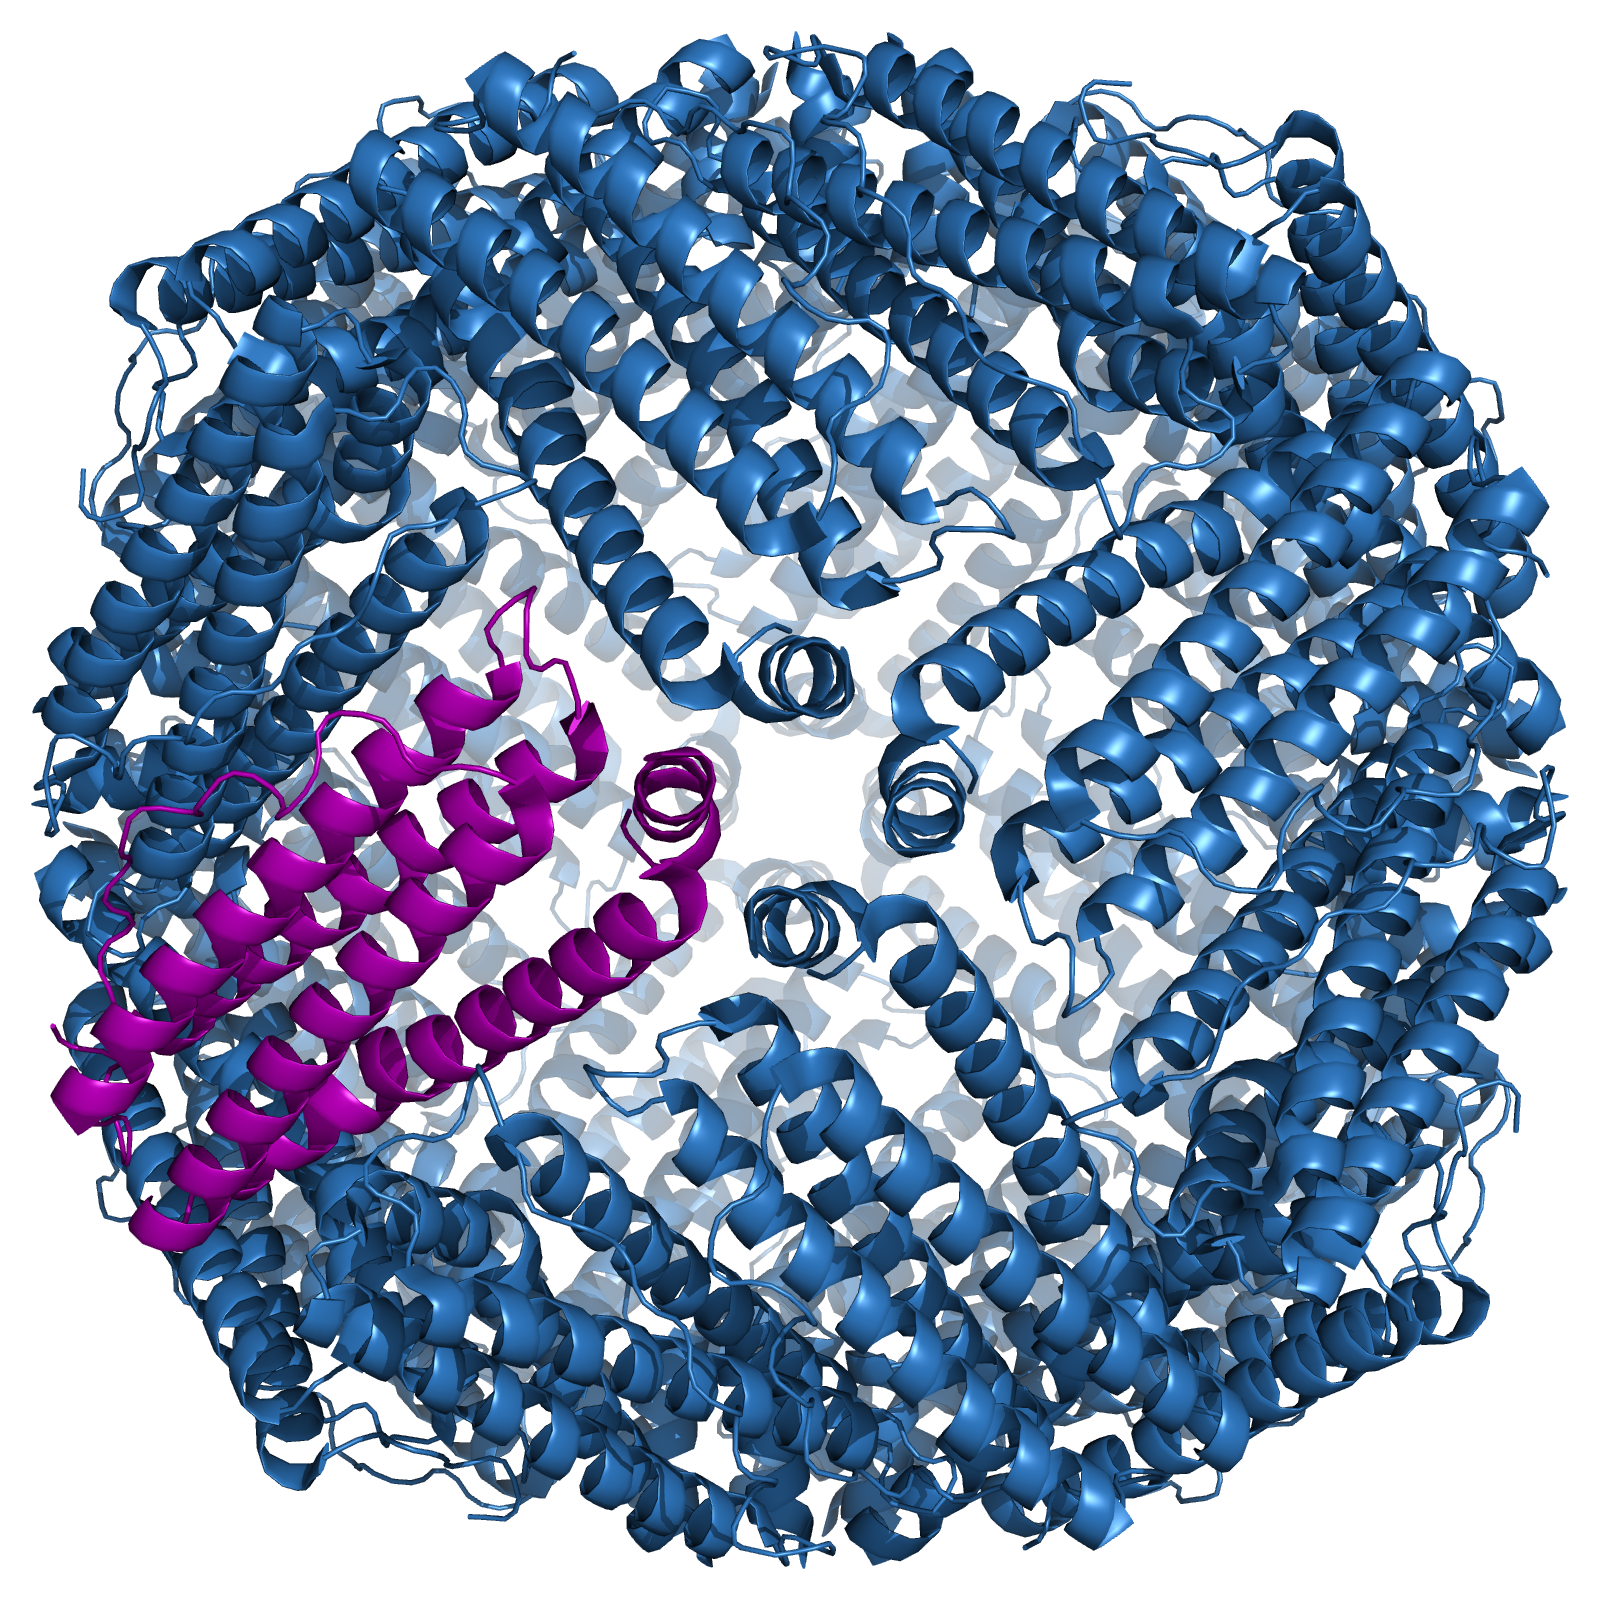 Computer generated image of the structure of a storage protein called ferritin, which stores iron in cells. The protein is roughly spherical in shape.